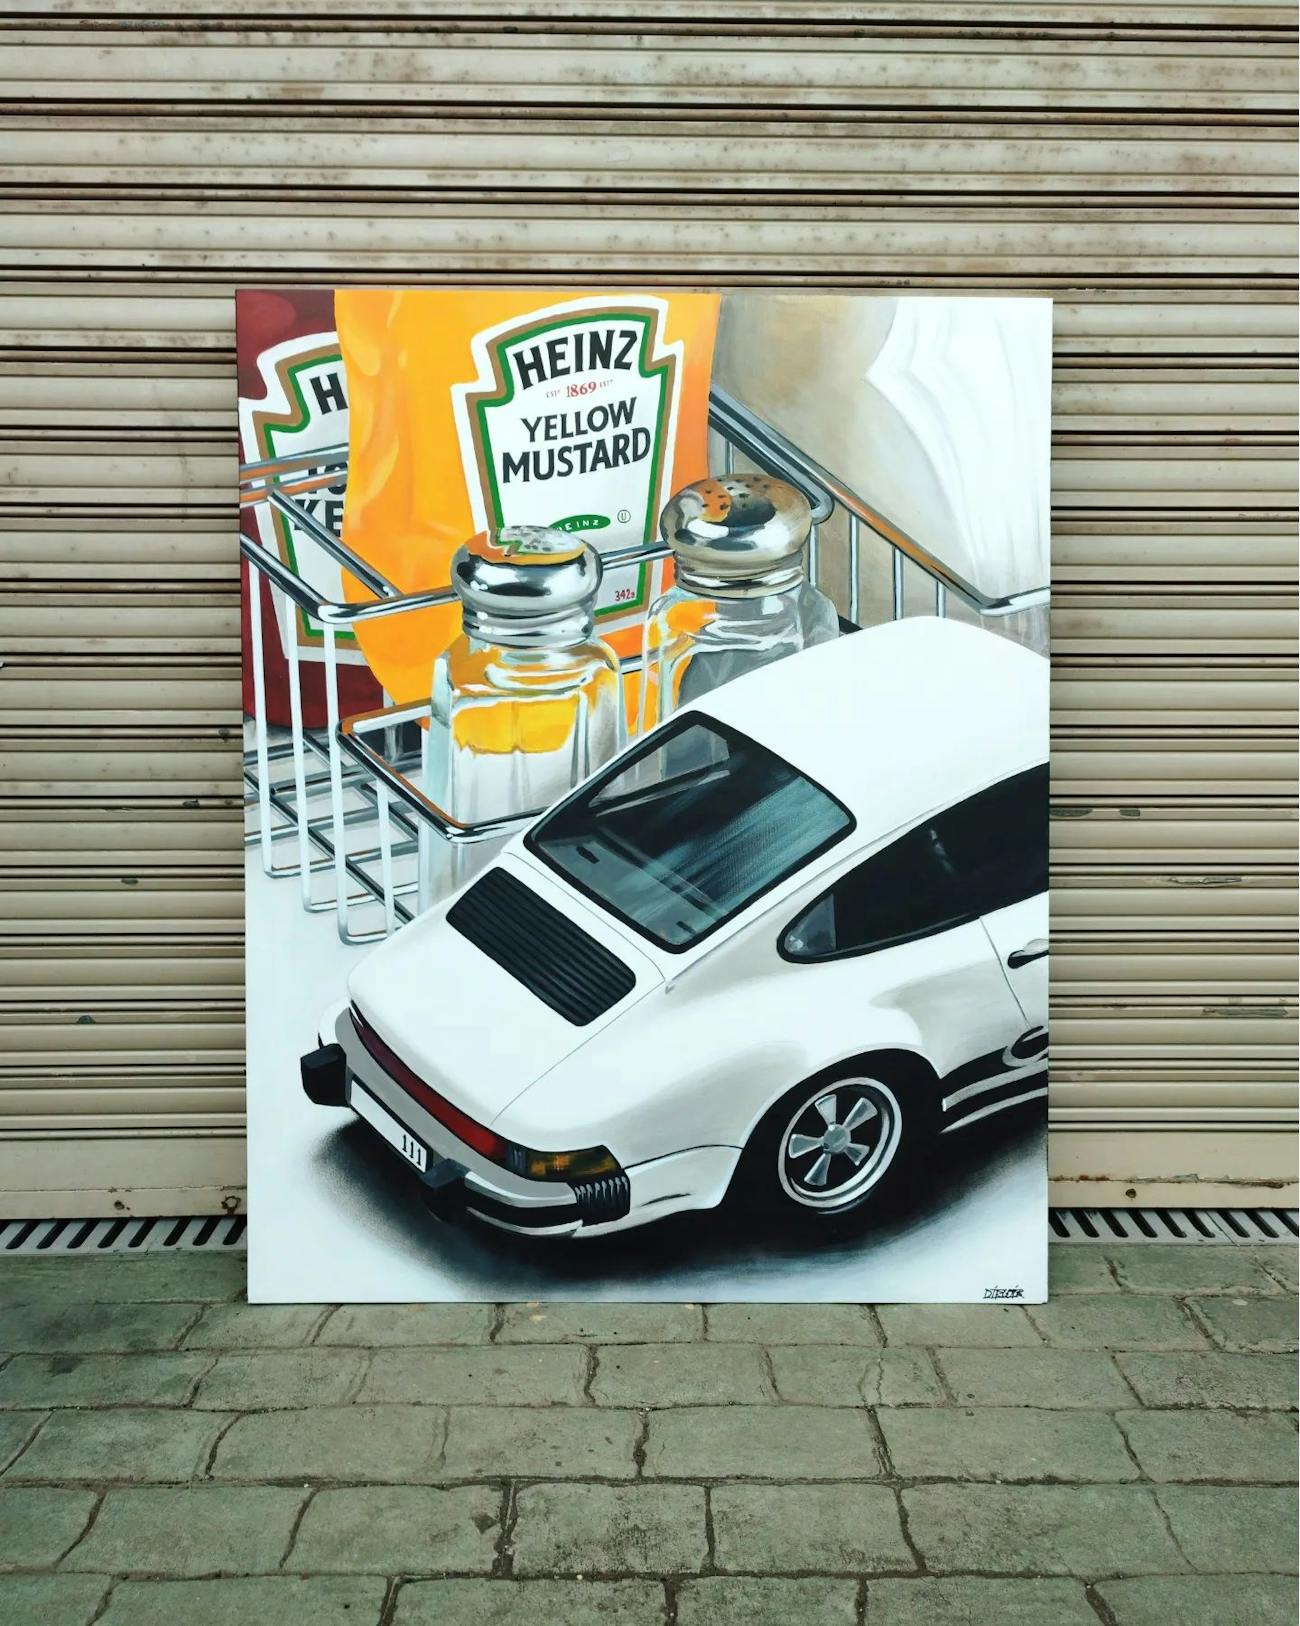 Painting of white Porsche 911 next to Heinz mustard and ketchup bottles